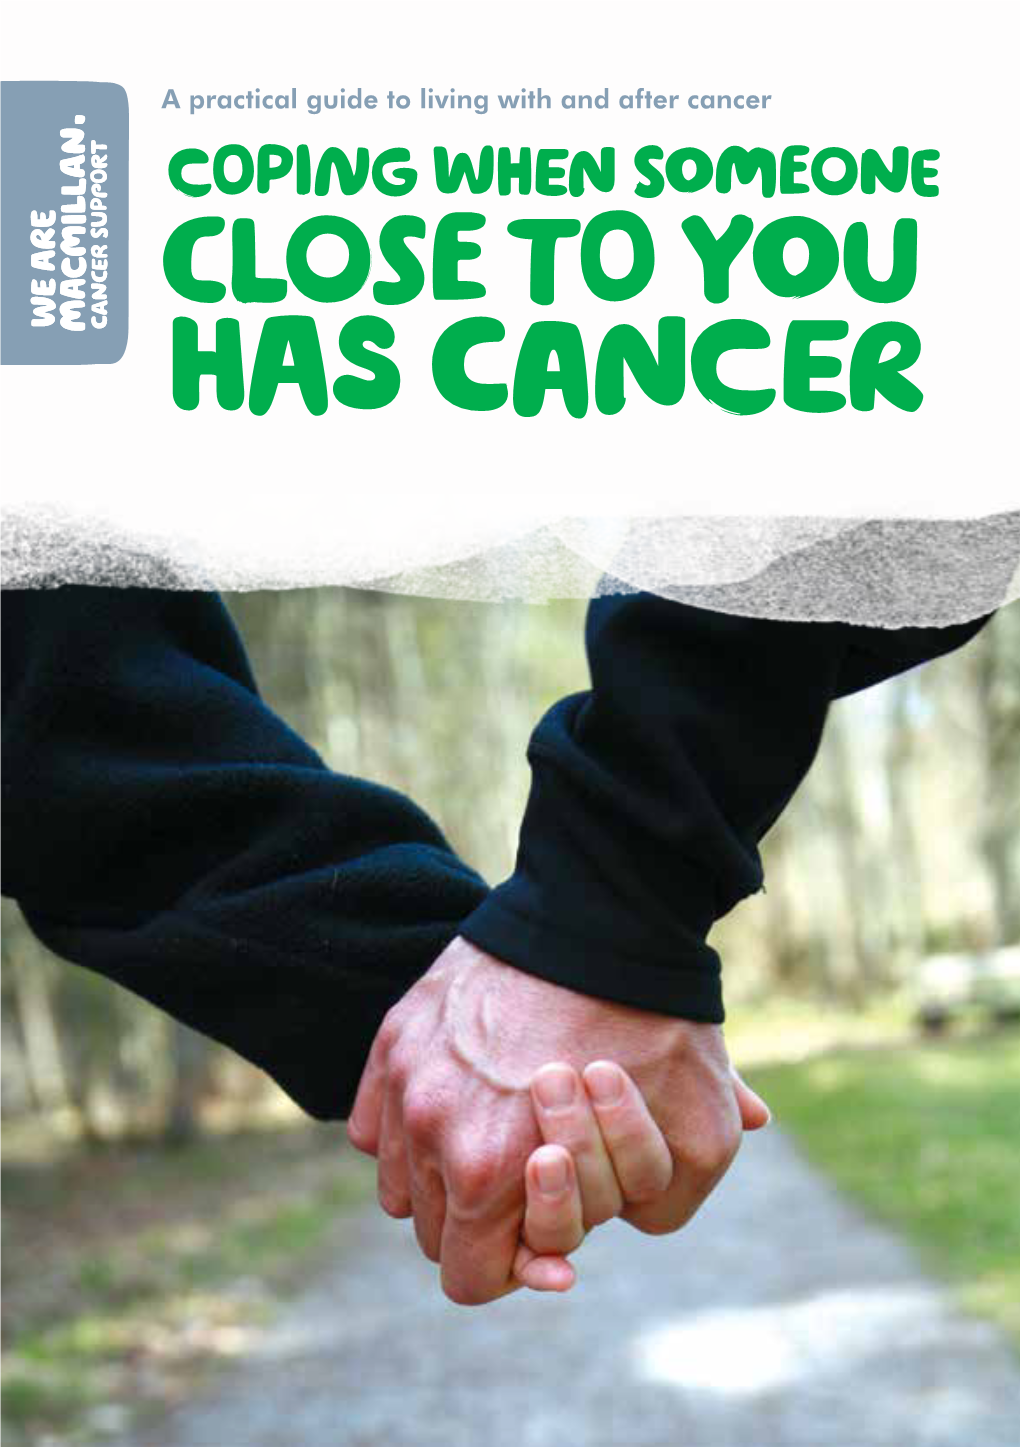 Coping When Someone Close to You Has Cancer